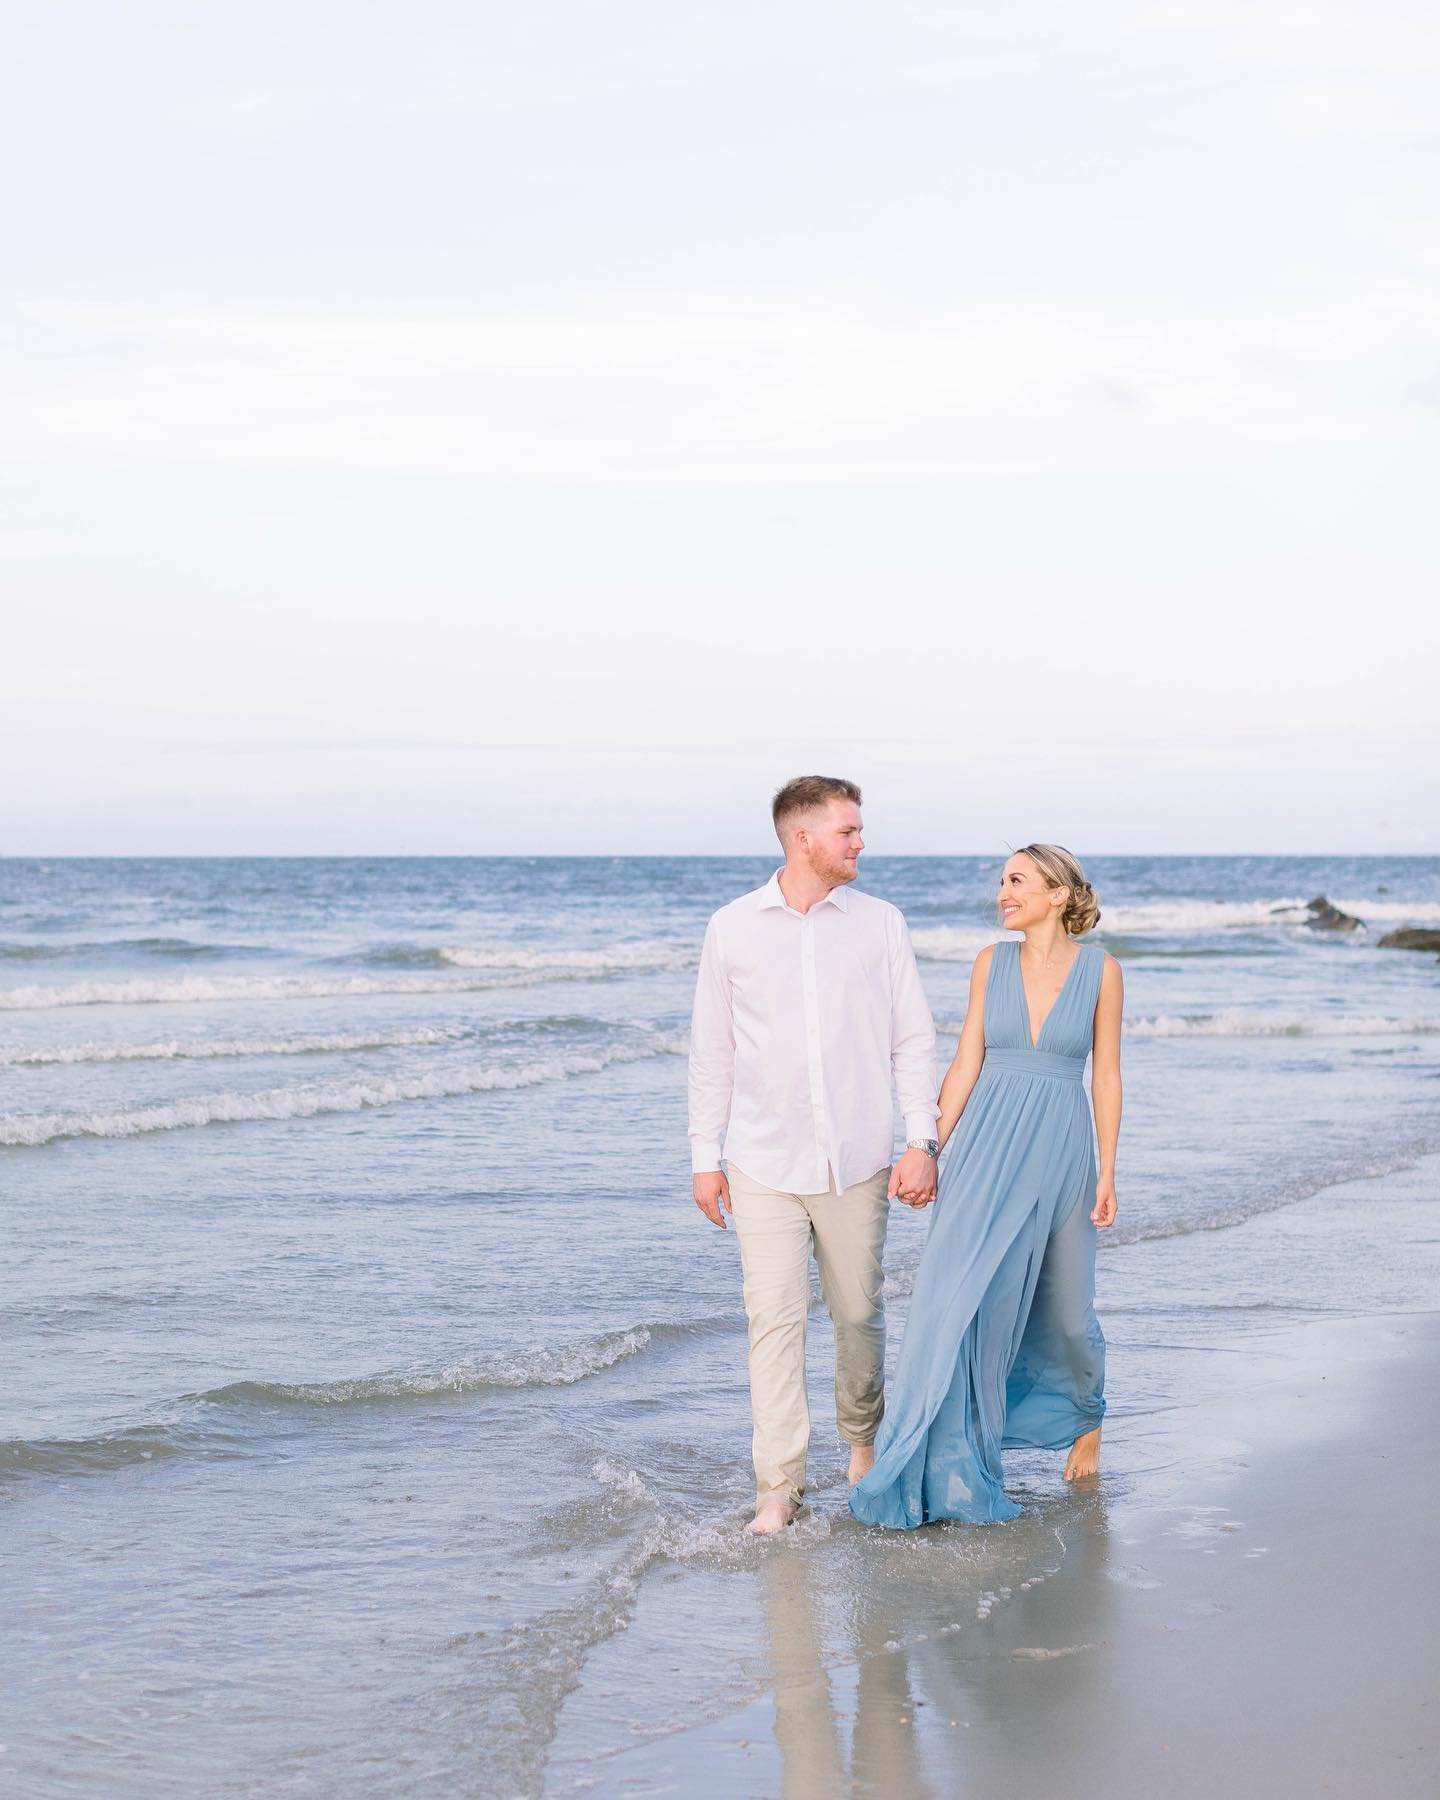 Summer is coming to a close &amp; fall is here but beach engagements will still be one of my favorite spots to shoot! 🥰
.
.
.

#photographer #charlottephotographer #charlottefamilyphotographer #charlotteweddingphotographer #photoshoot #familyphotogr